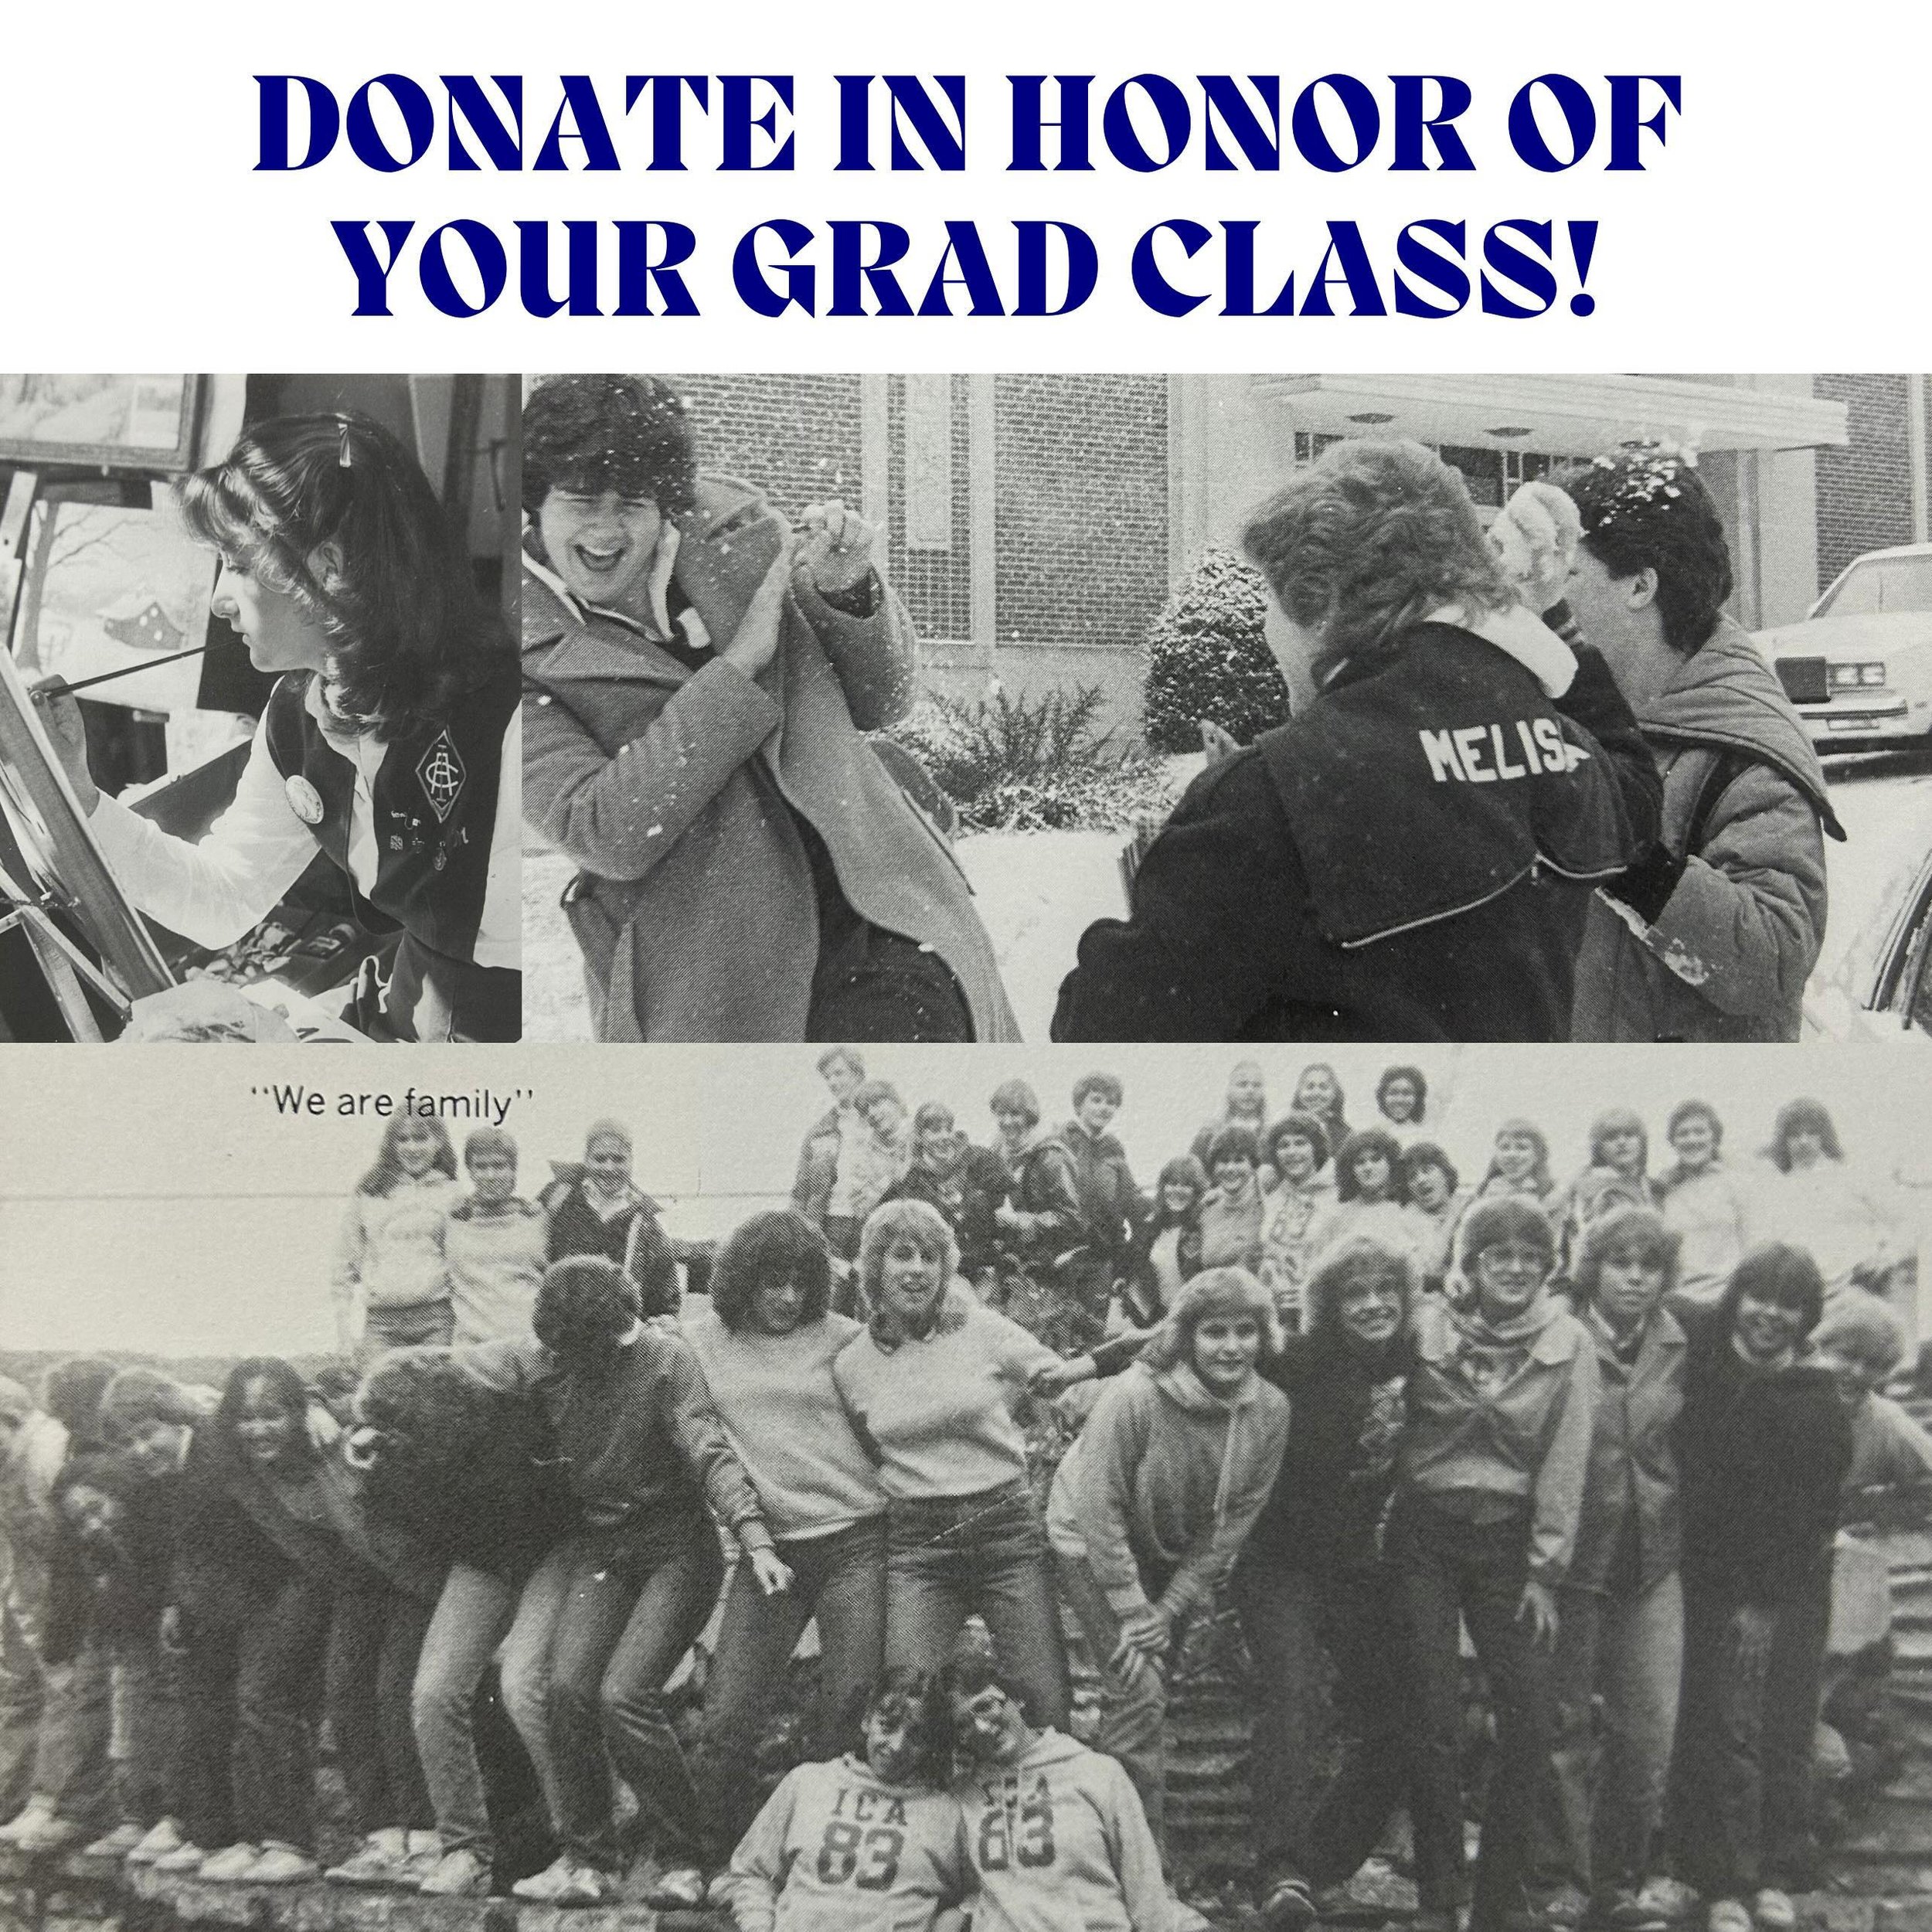 Donate in honor of your graduating class by donating your grad year. 

For example, if you graduated in 1987, donate $19.87!

Click the link in our bio to donate!